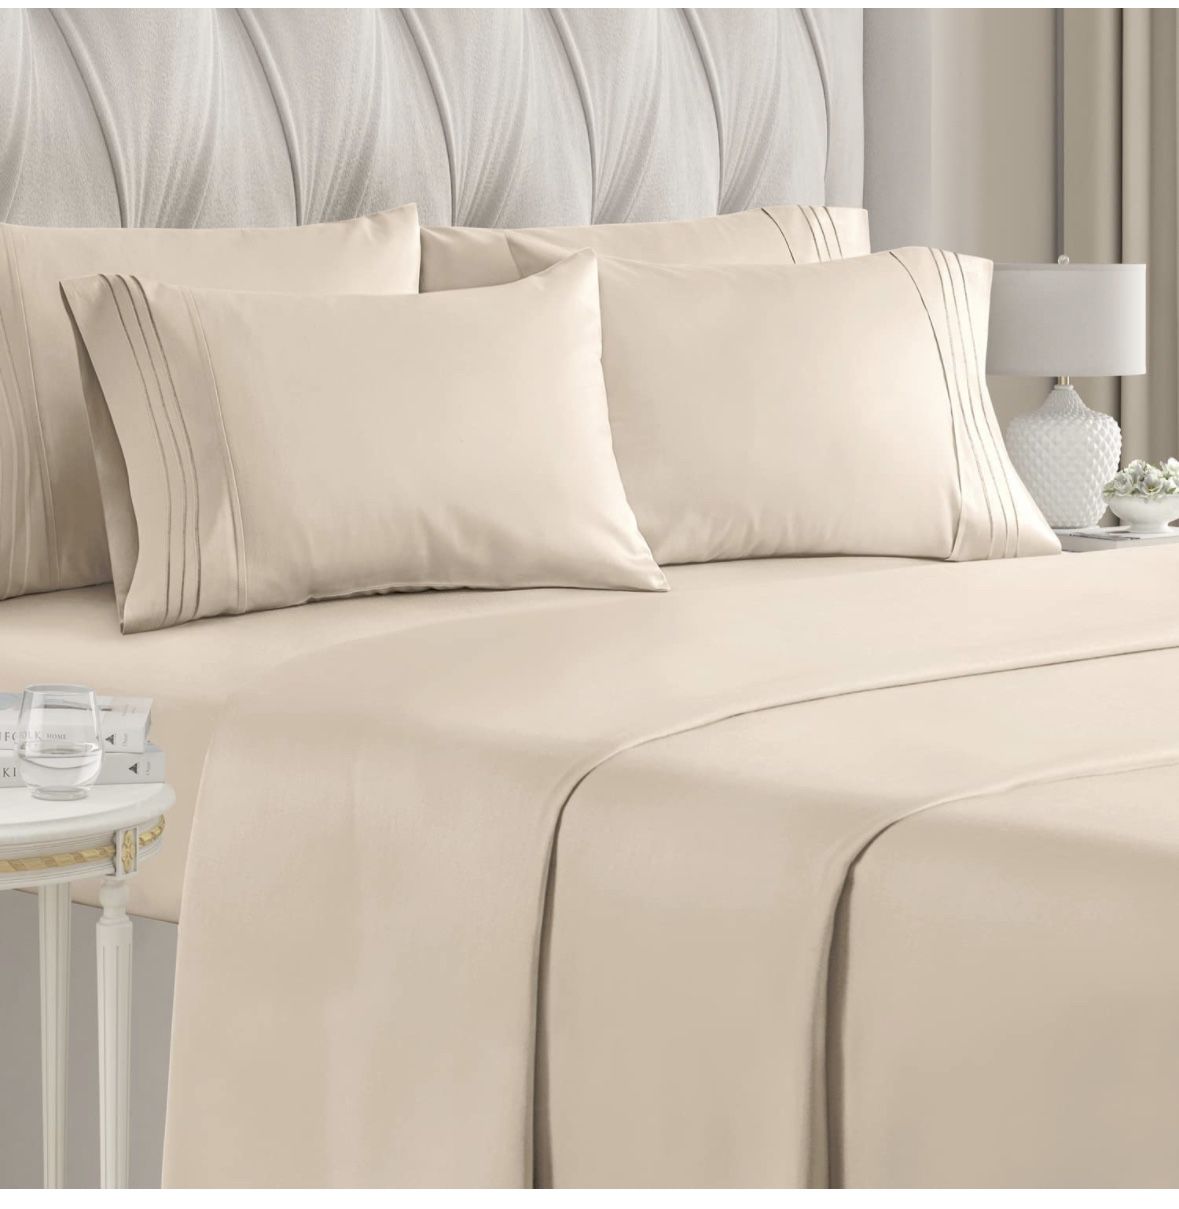 Queen Size Sheet Set - 6 Piece Set - Hotel Luxury Bed Sheets - Extra Soft - Deep Pockets - Easy Fit - Breathable & Cooling Sheets - Wrinkle Free - Com